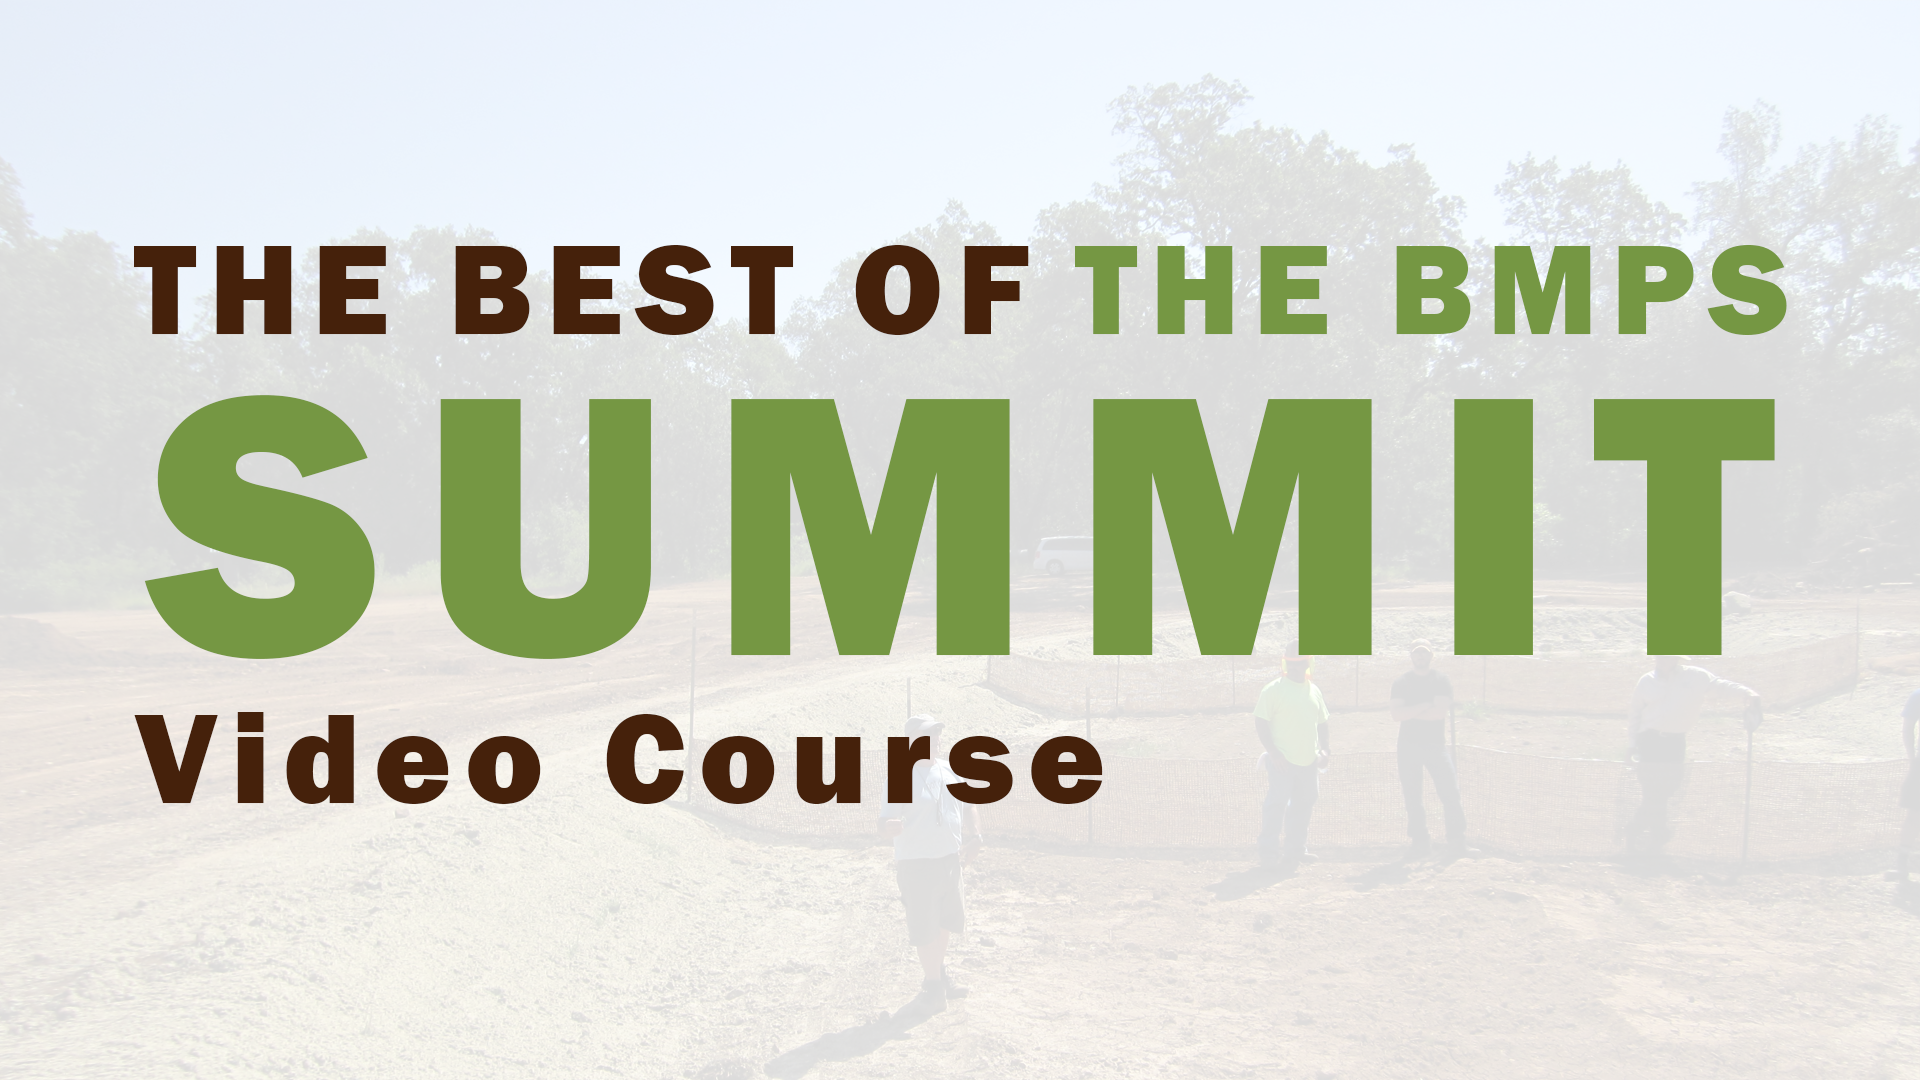 The Best of the BMPs SUMMIT Video Course